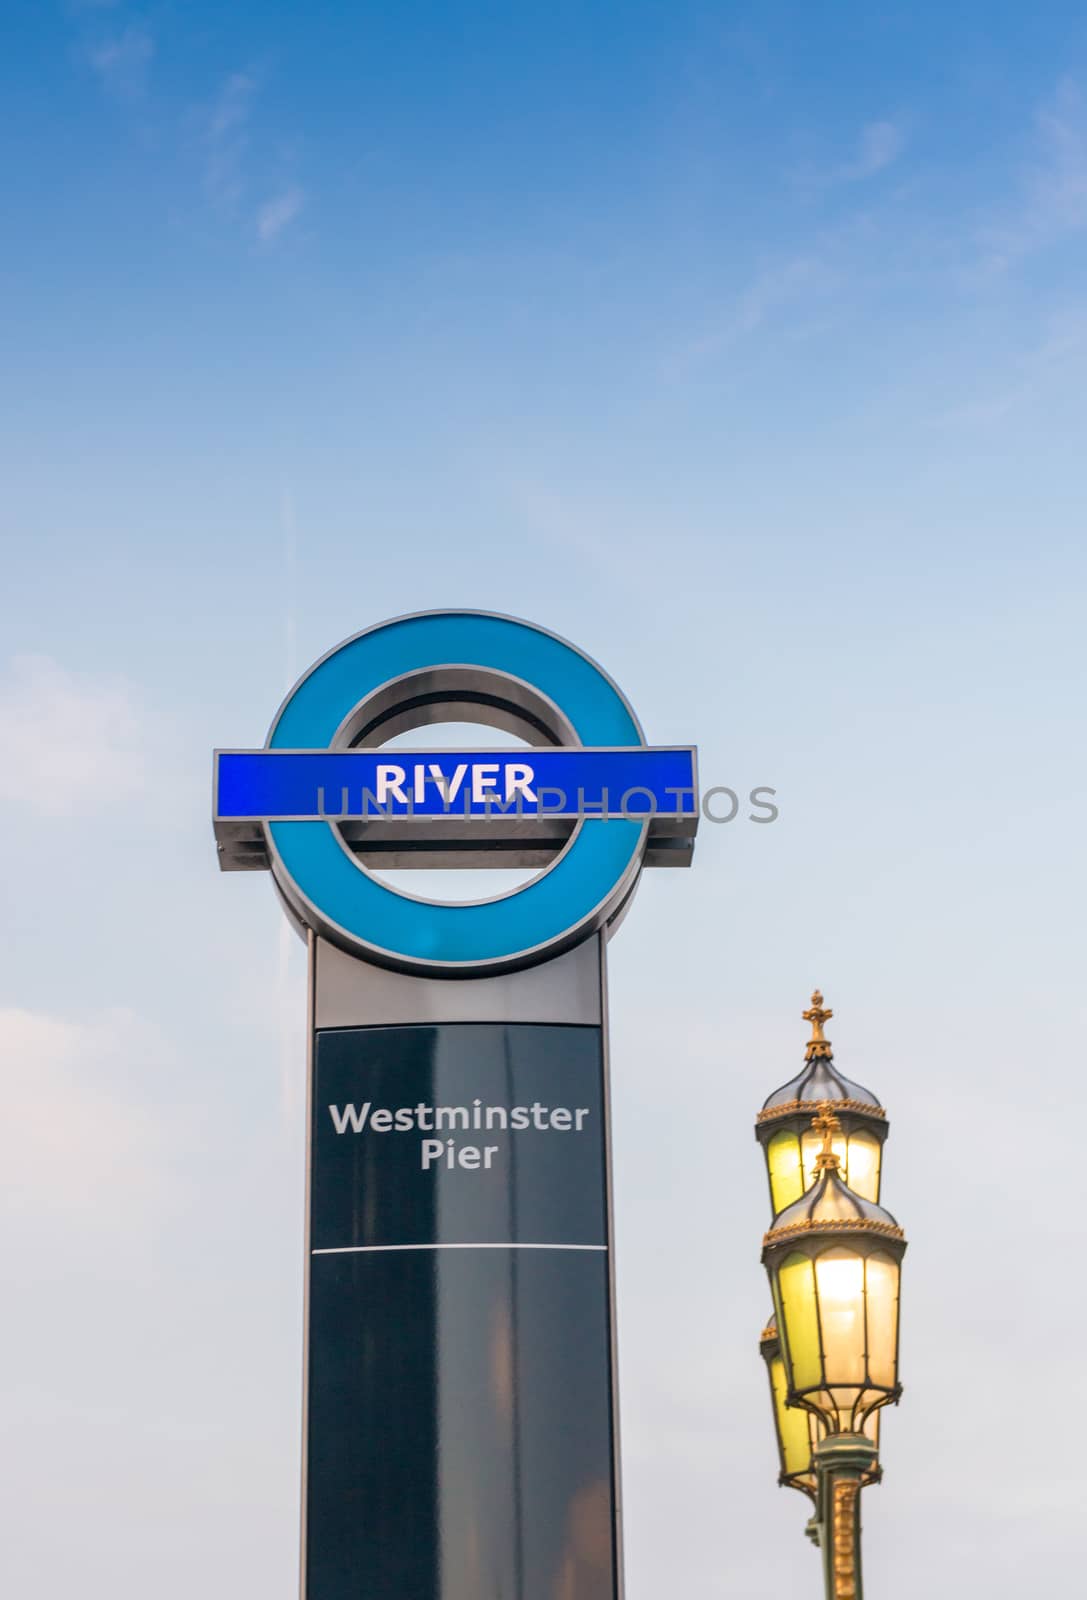 LONDON - JUNE 11, 2015: Westminster Pier sign with lamp post by jovannig